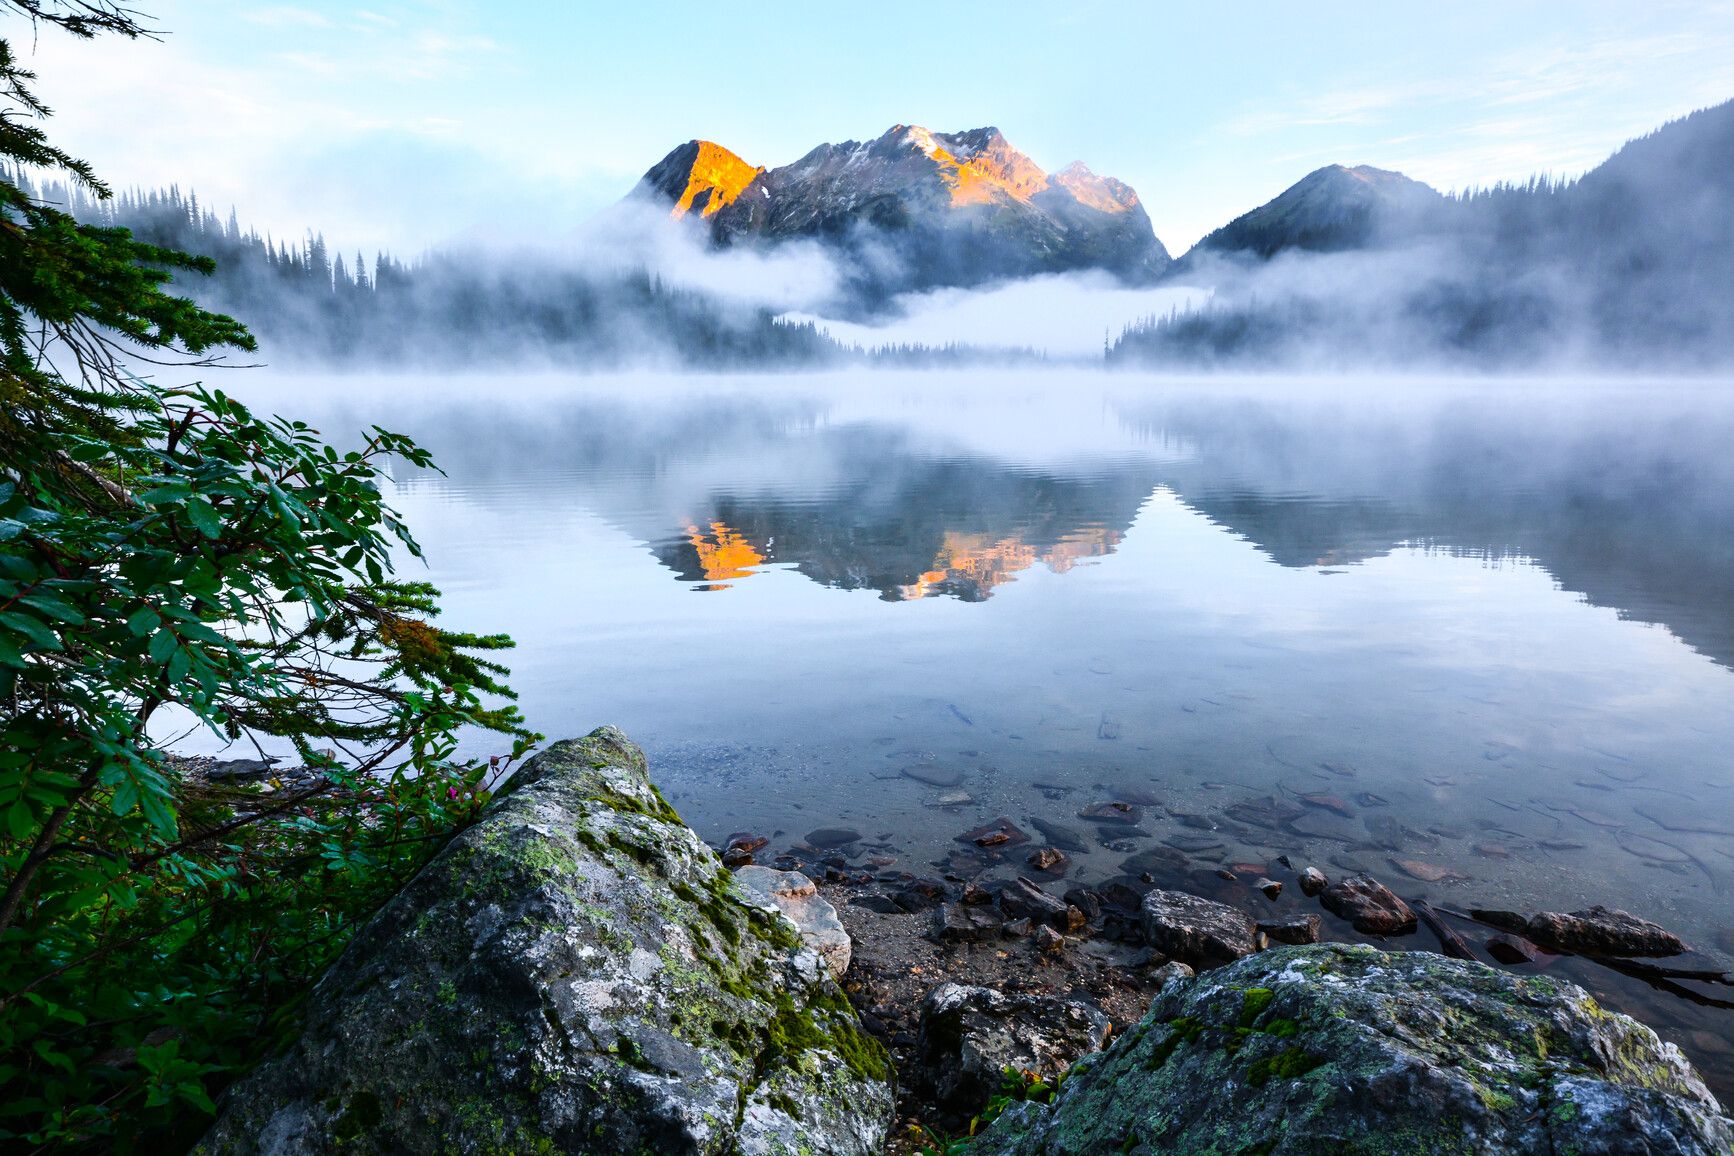 The early morning sun illuminates the peaks as mist rises from Big Peters Lake in Monashee Park.